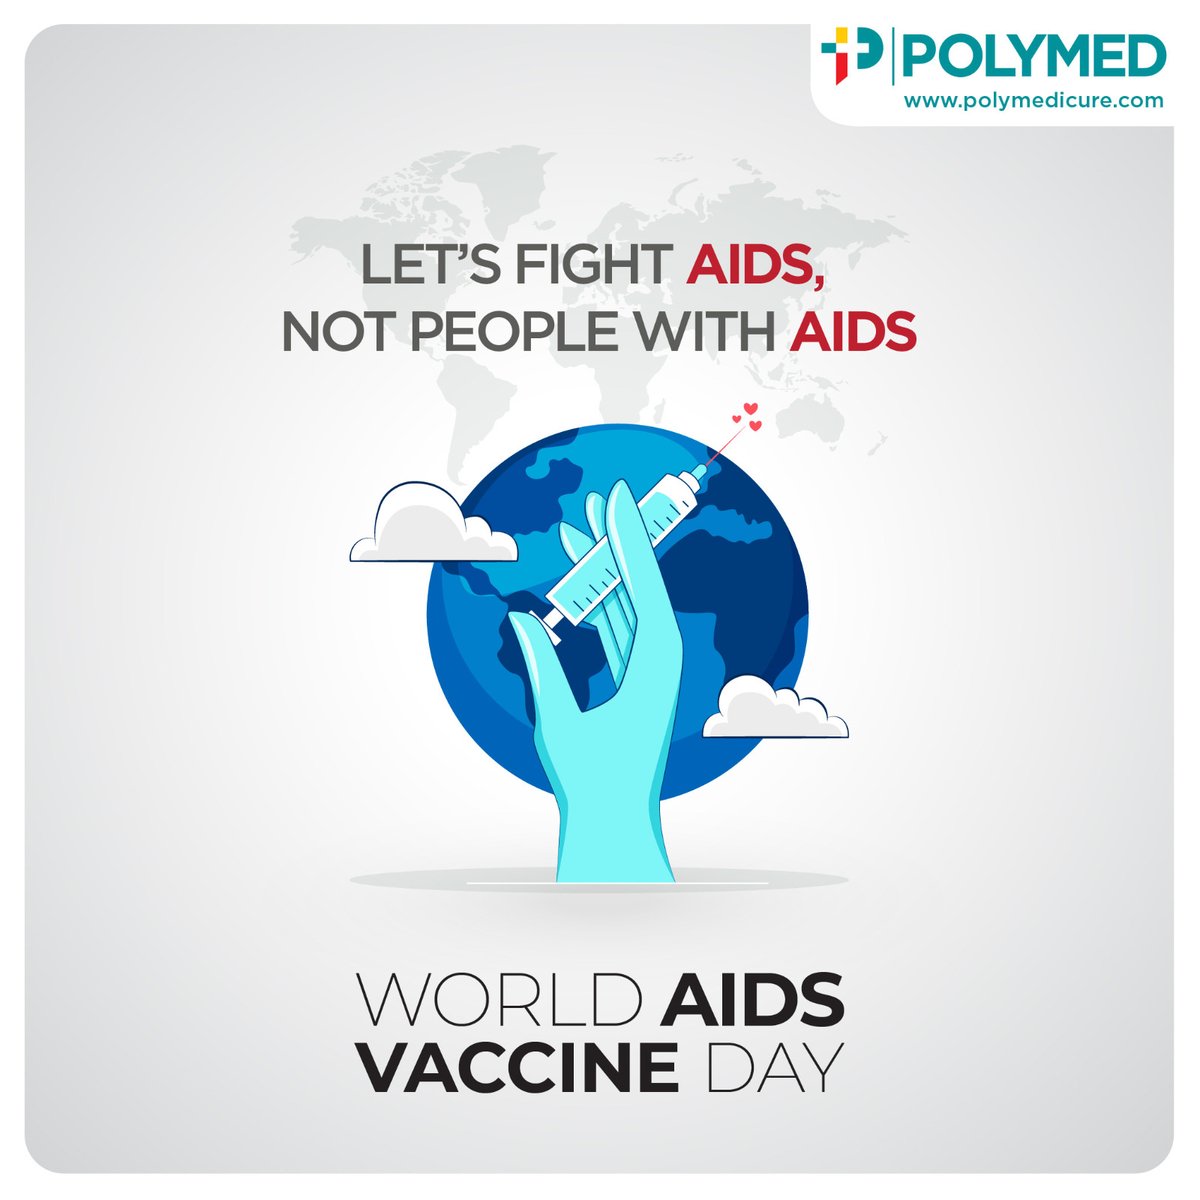 On this #WorldAIDSVaccineDay , let’s thank and encourage the healthcare workers, scientists, researchers, and doctors who are working together to find an effective #Vaccine for #AIDS.

#HIVAwareness #AIDSAwareness #Polymed